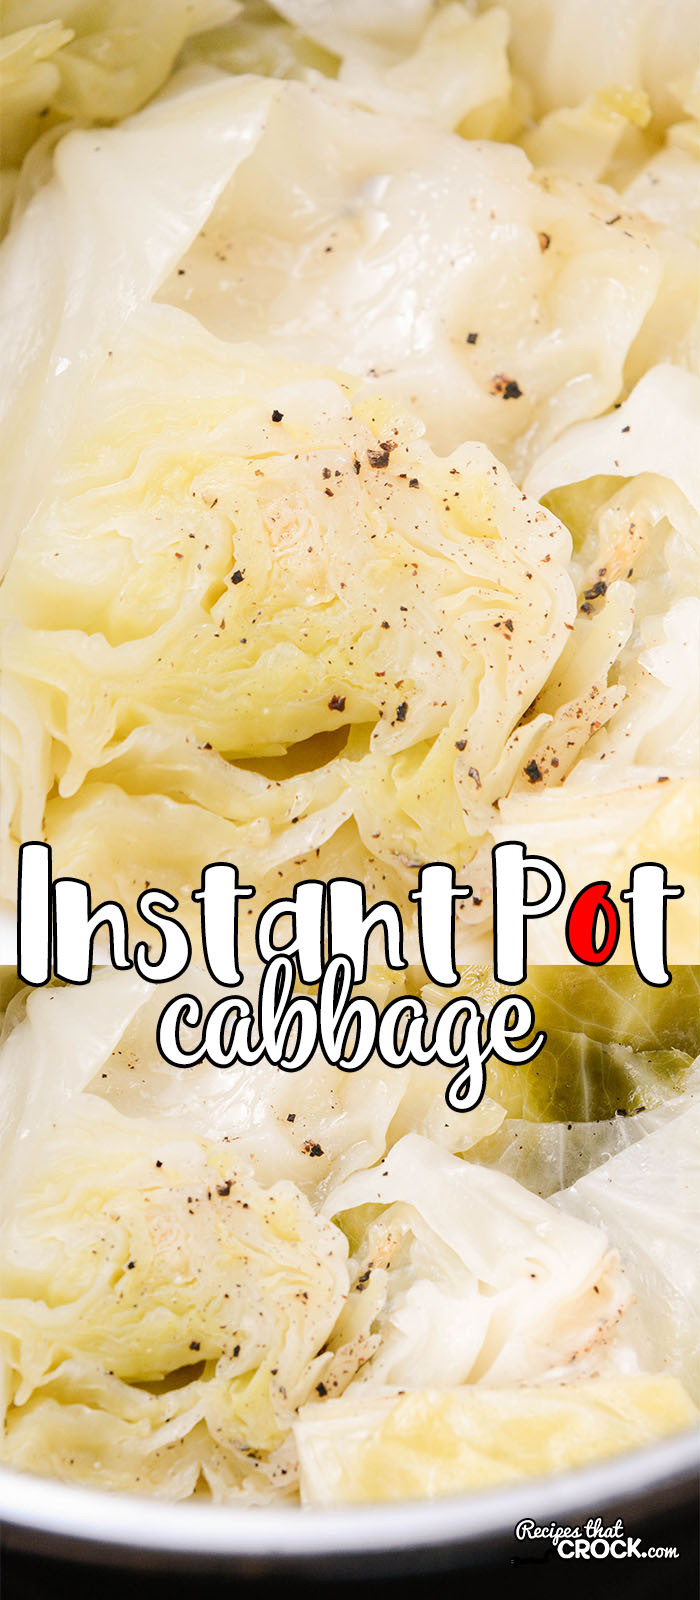 Cabbage In Instant Pot
 Instant Pot Cabbage Recipes That Crock